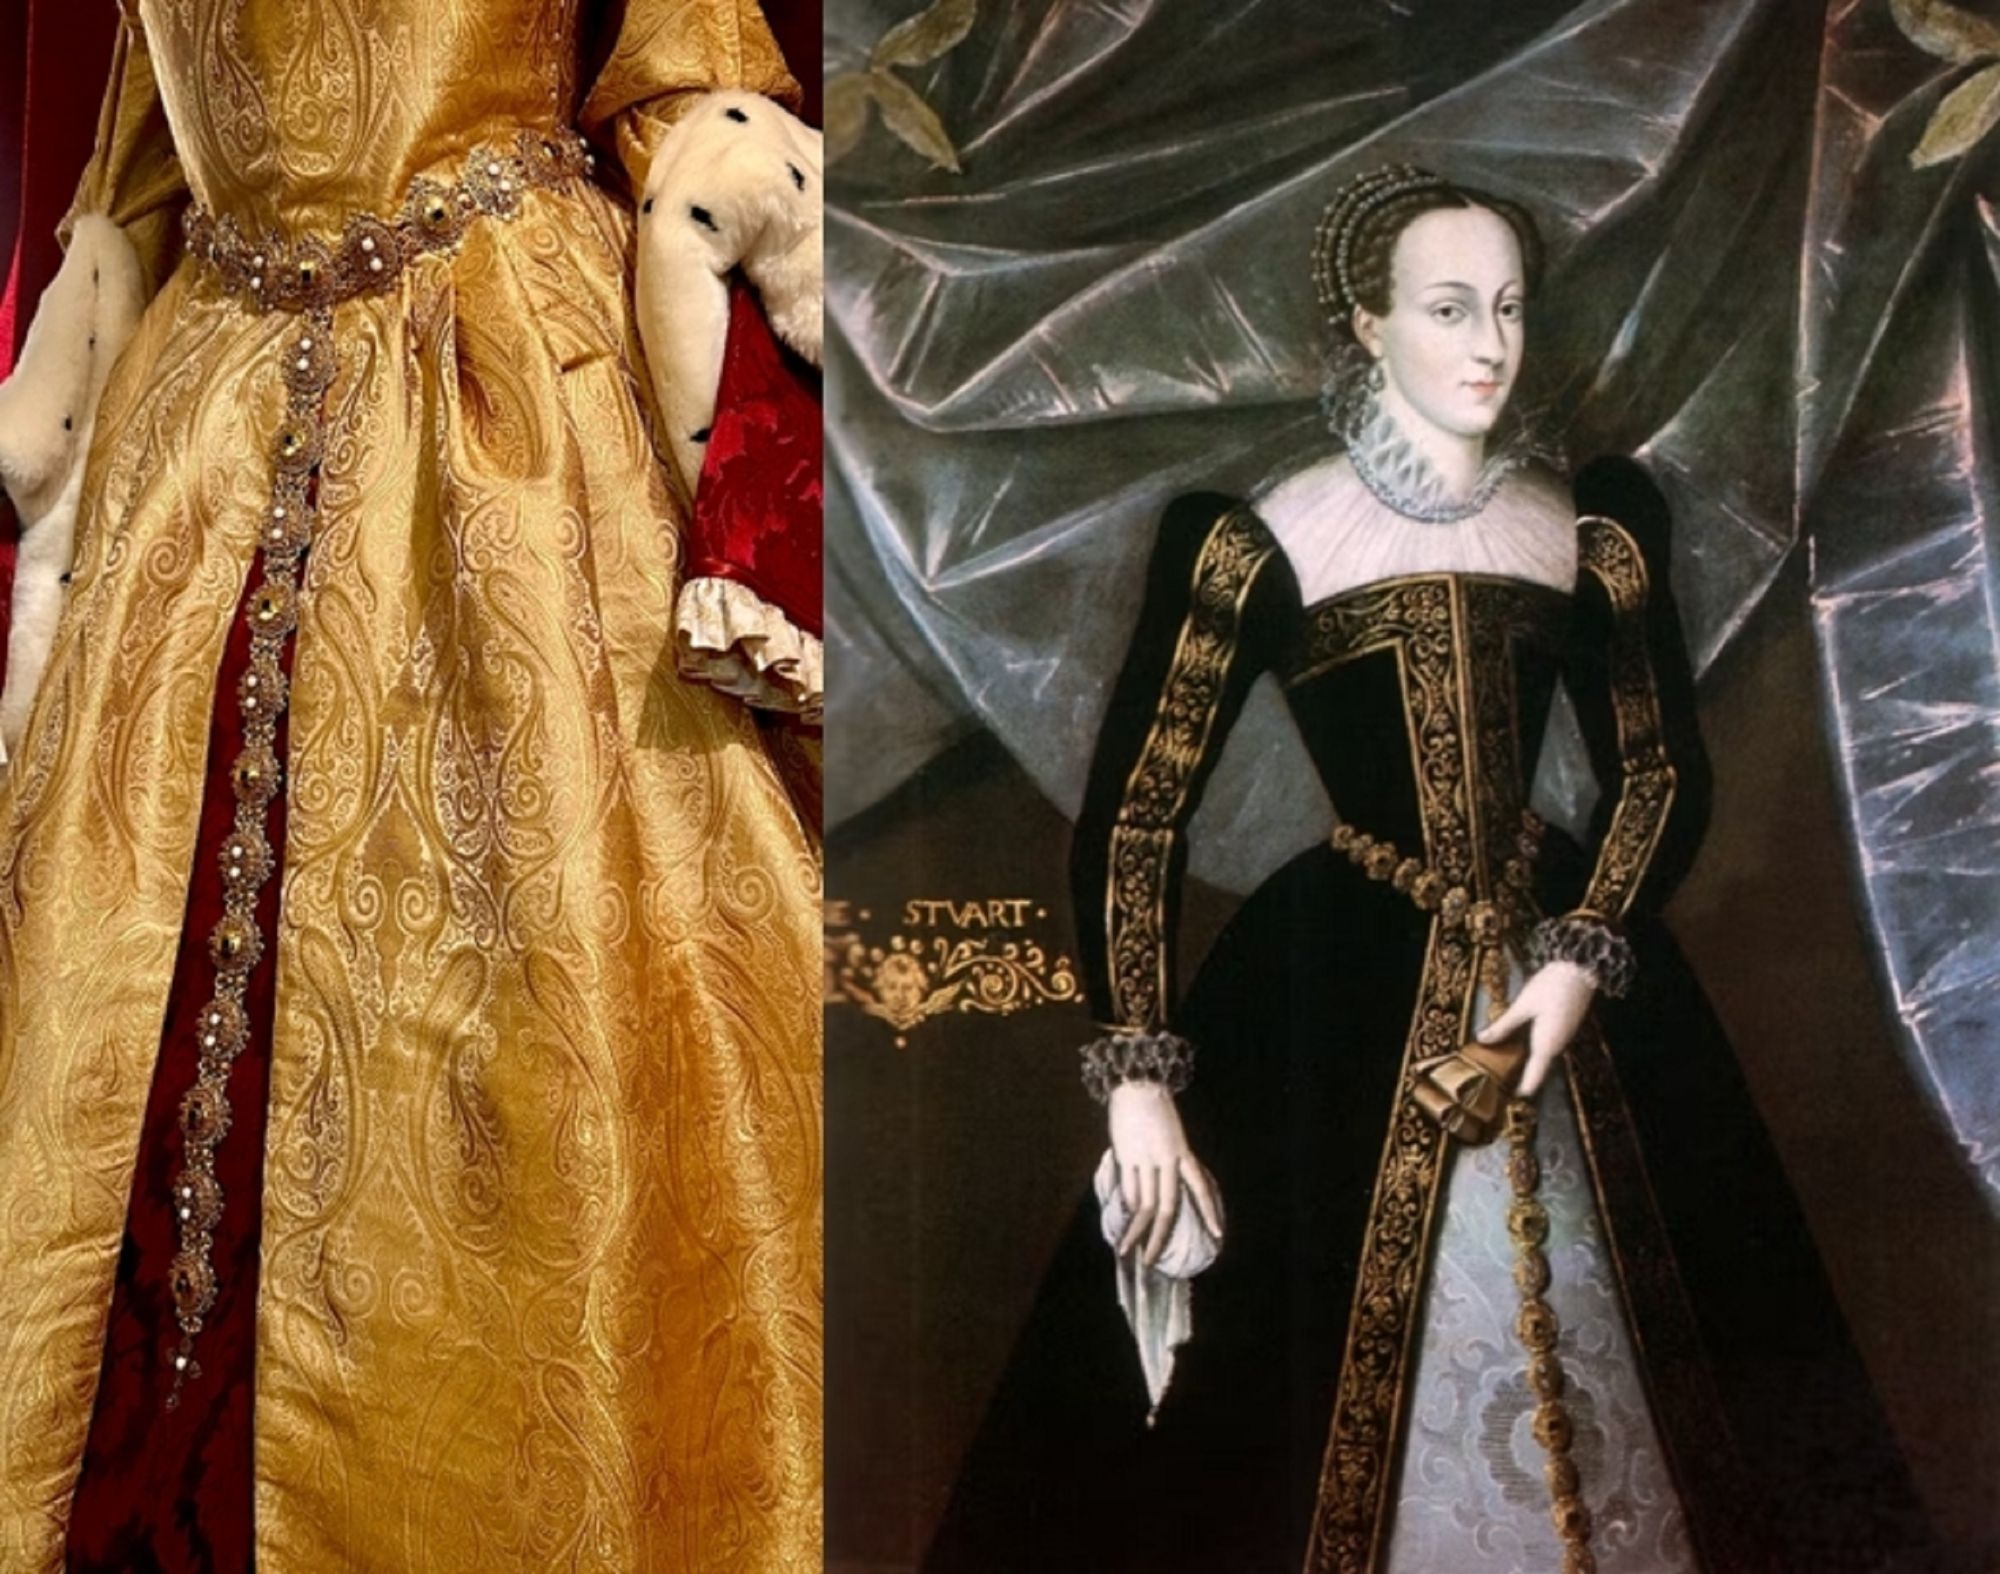 Mary Queen of Scots girdle belt compare.png1.jpg1.jpg